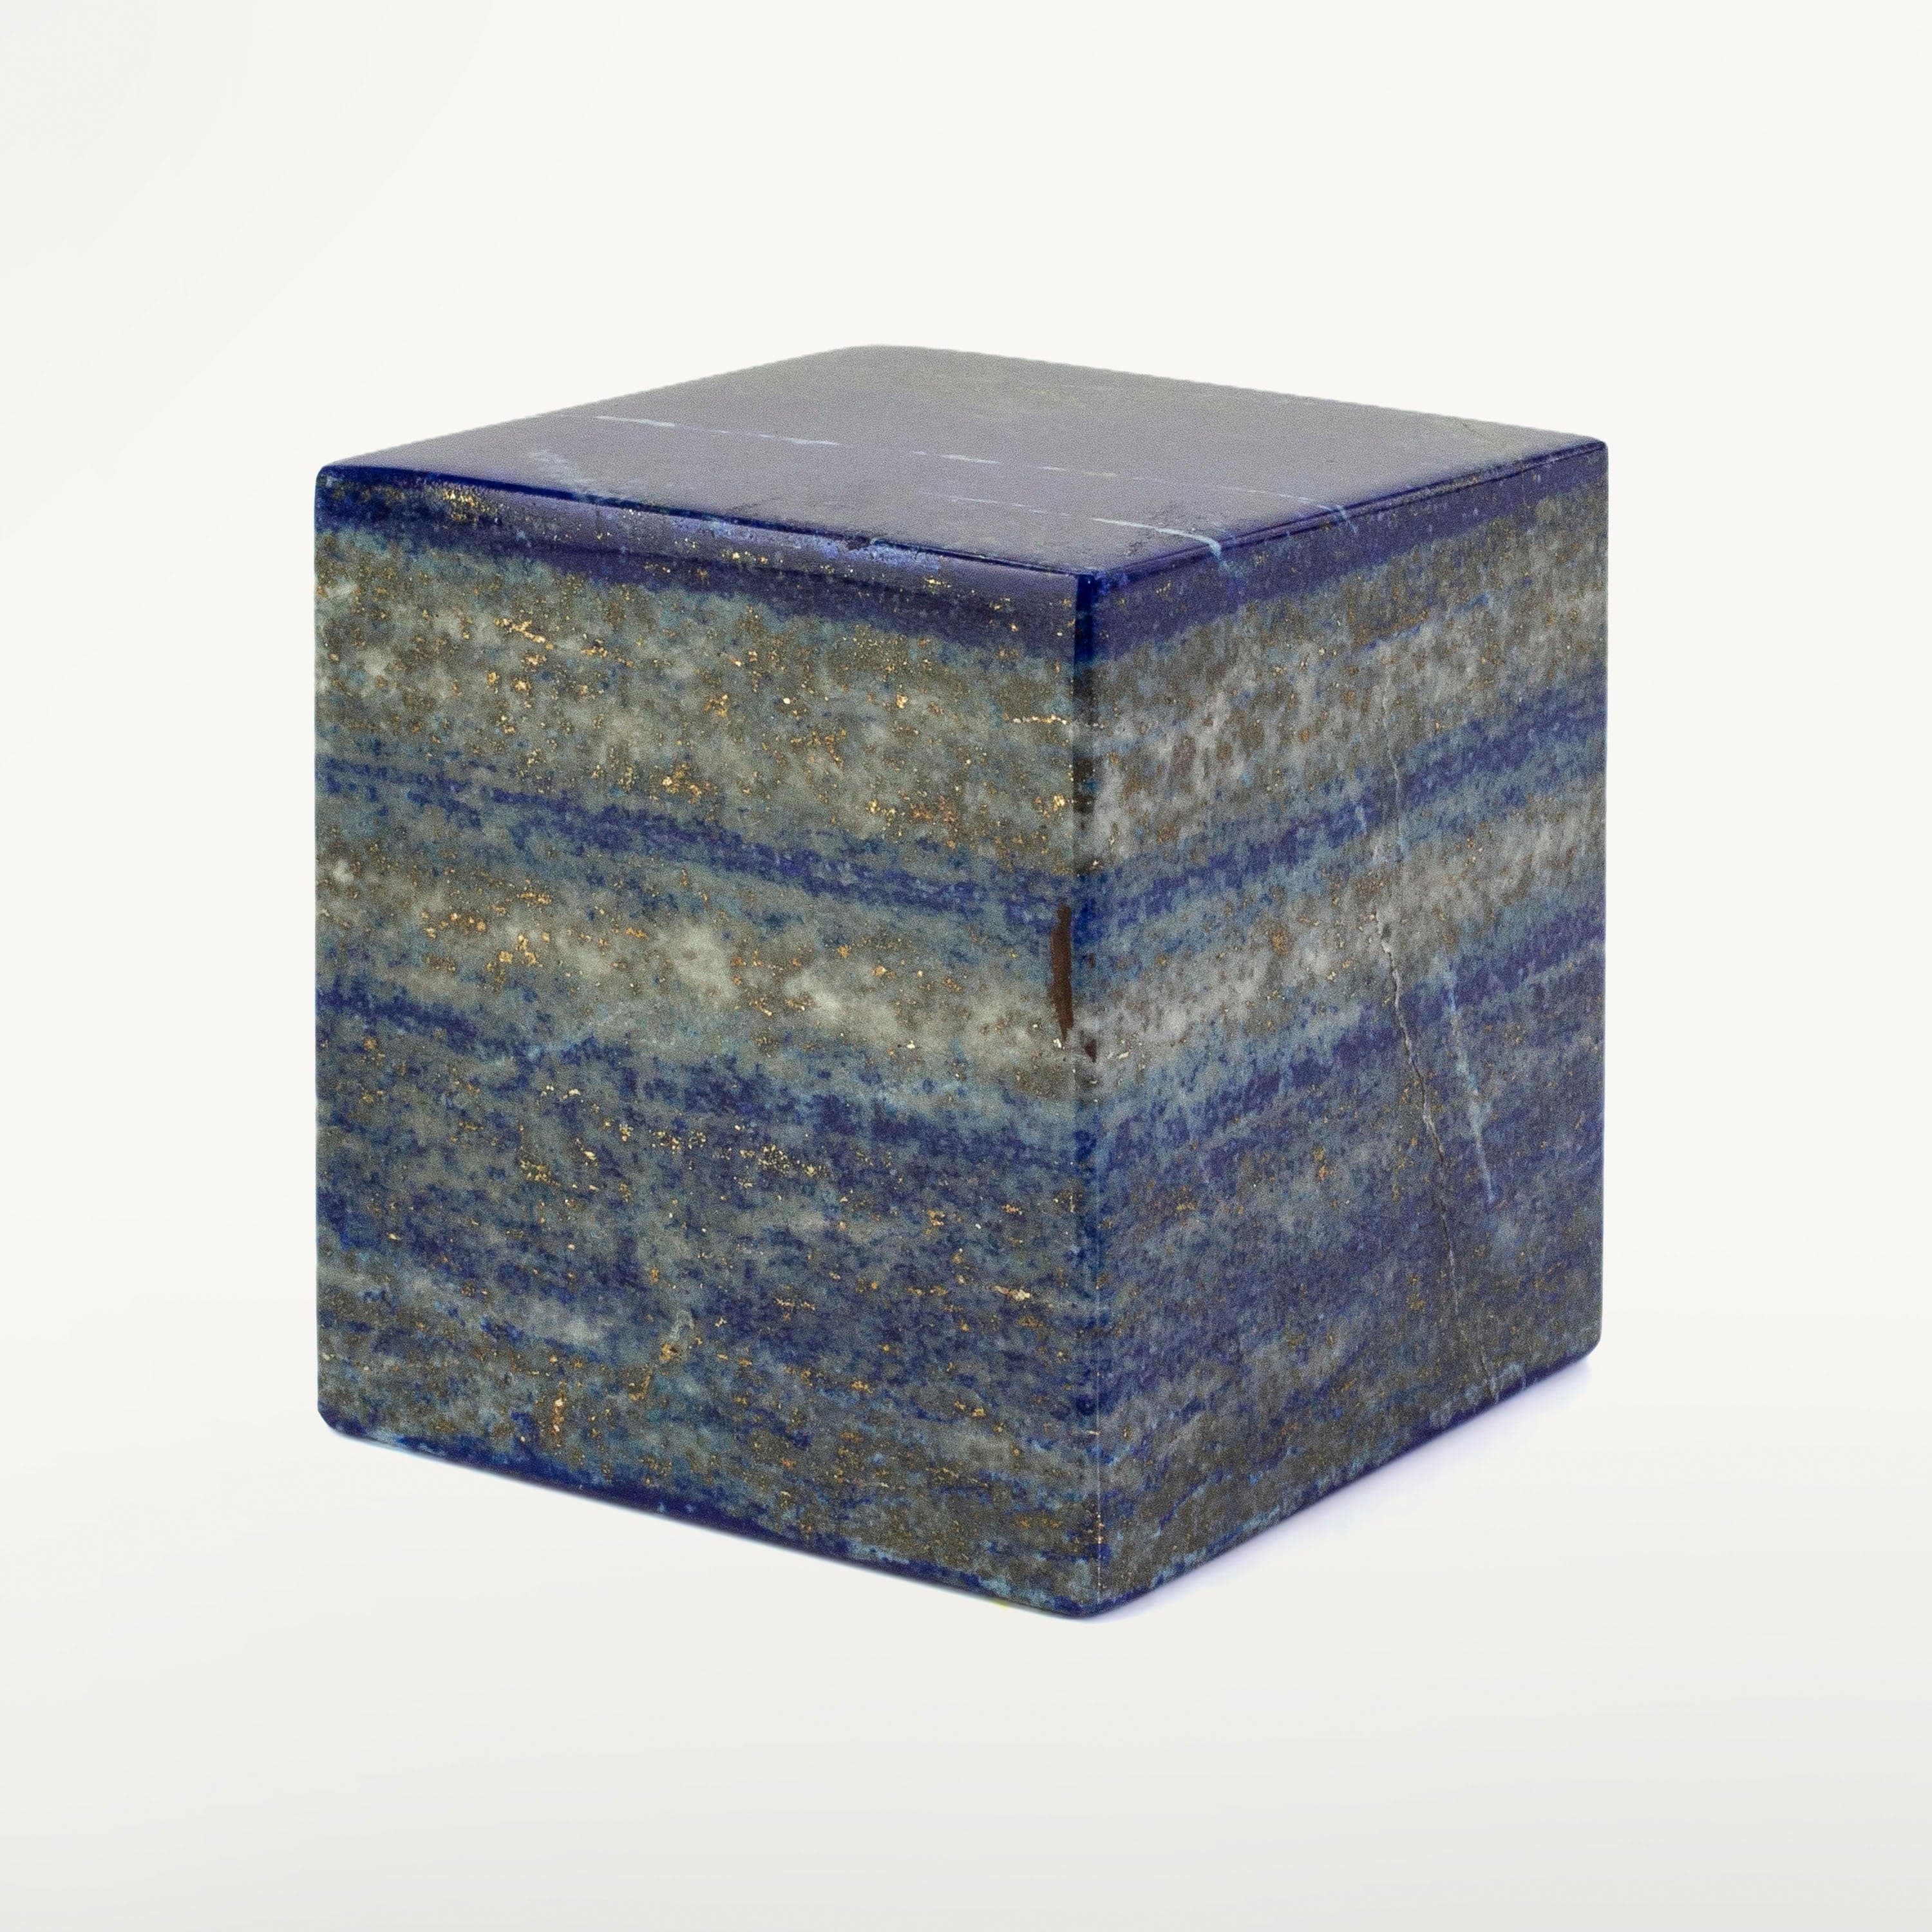 Kalifano Lapis Lapis Lazuil Cube from Afghanistan - 660 g / 1.5 lbs LP700.007